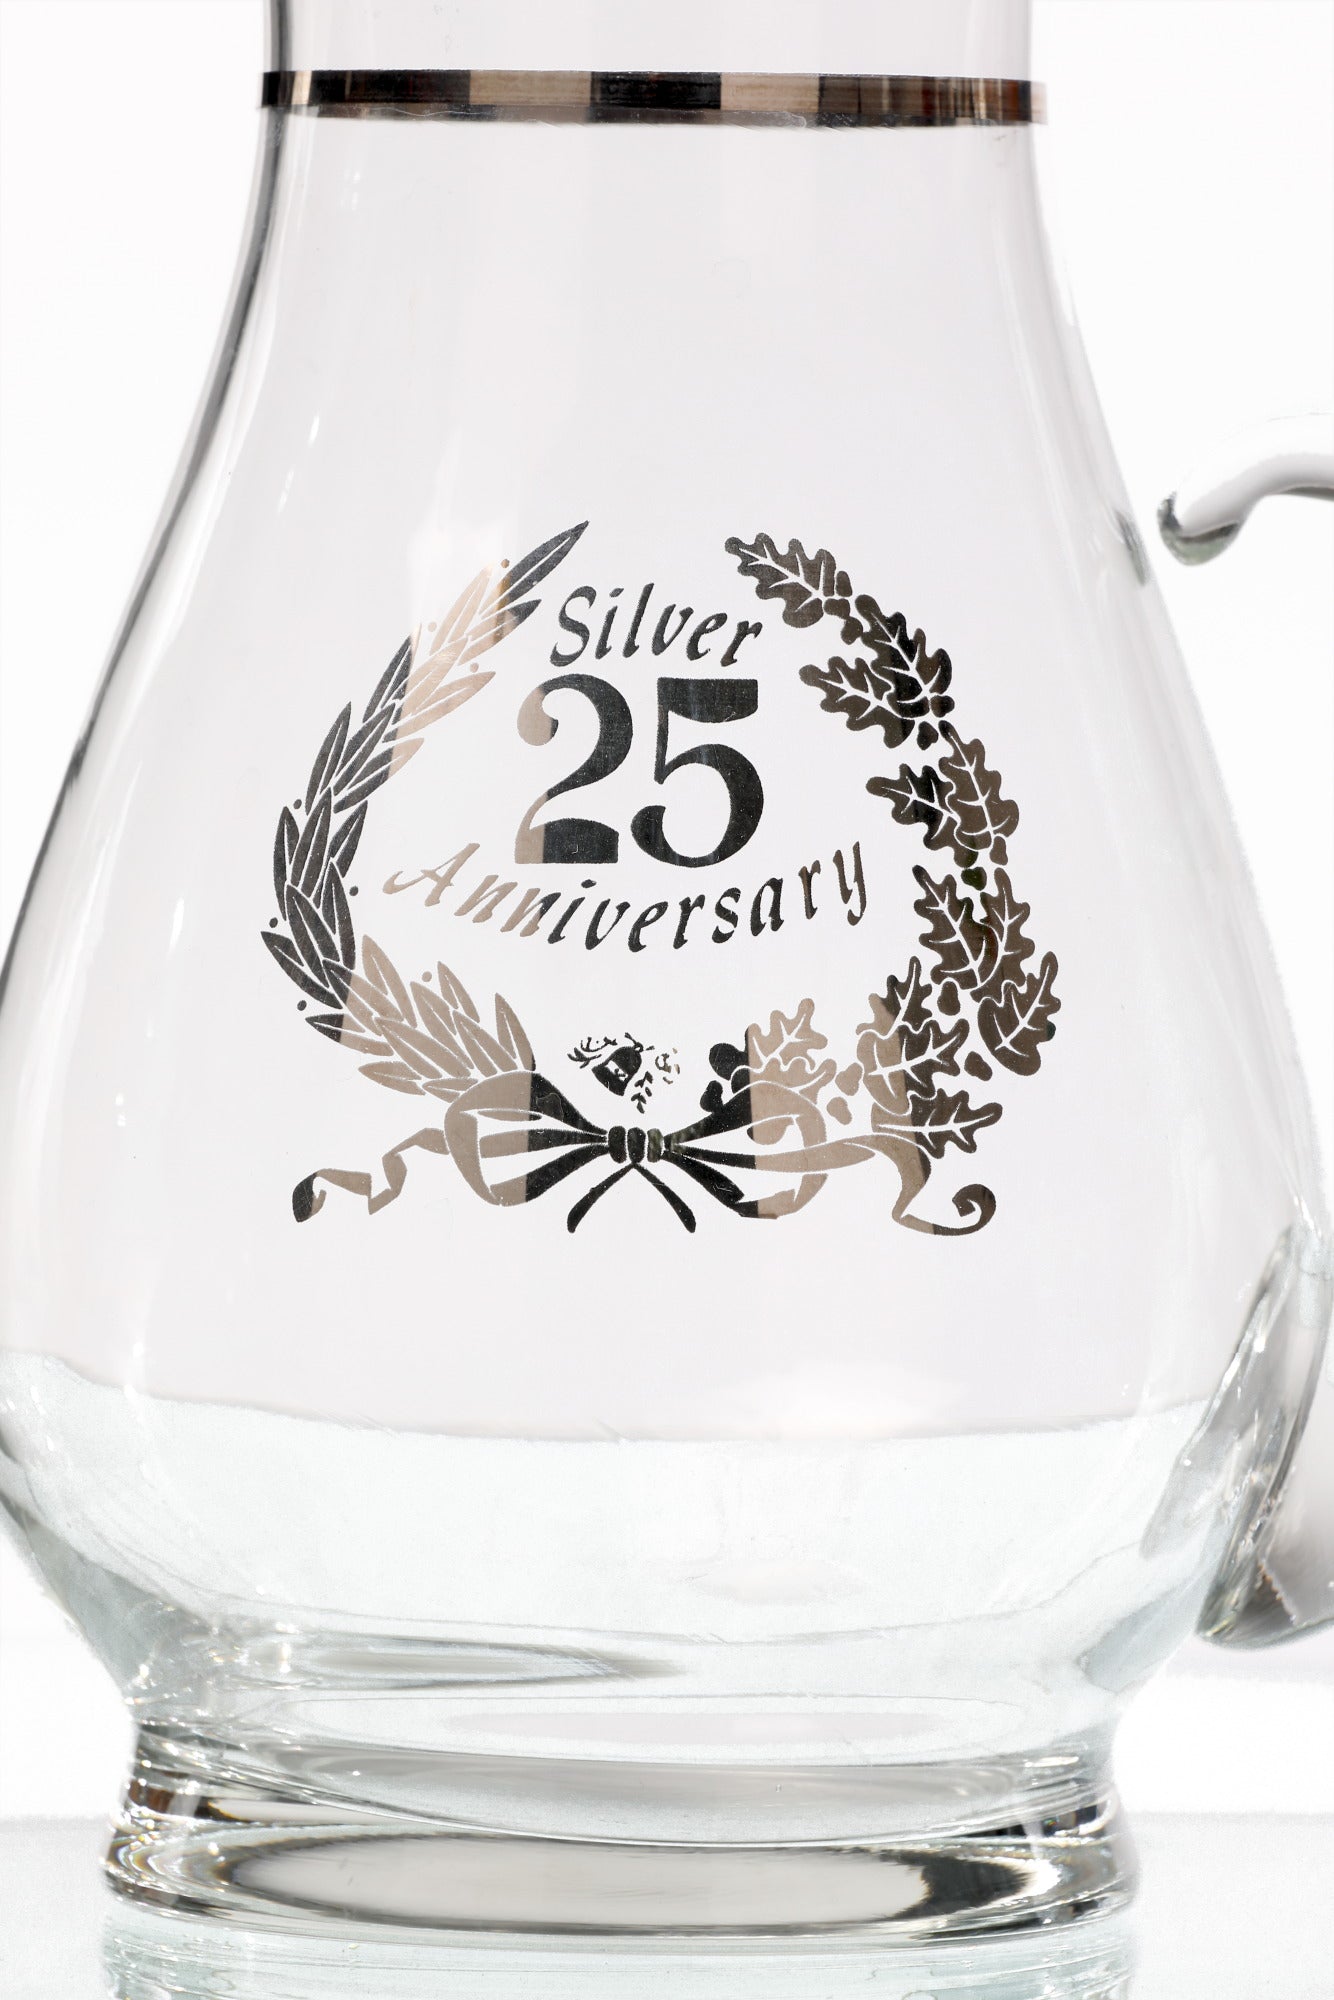 25th anniversary crystal glass service